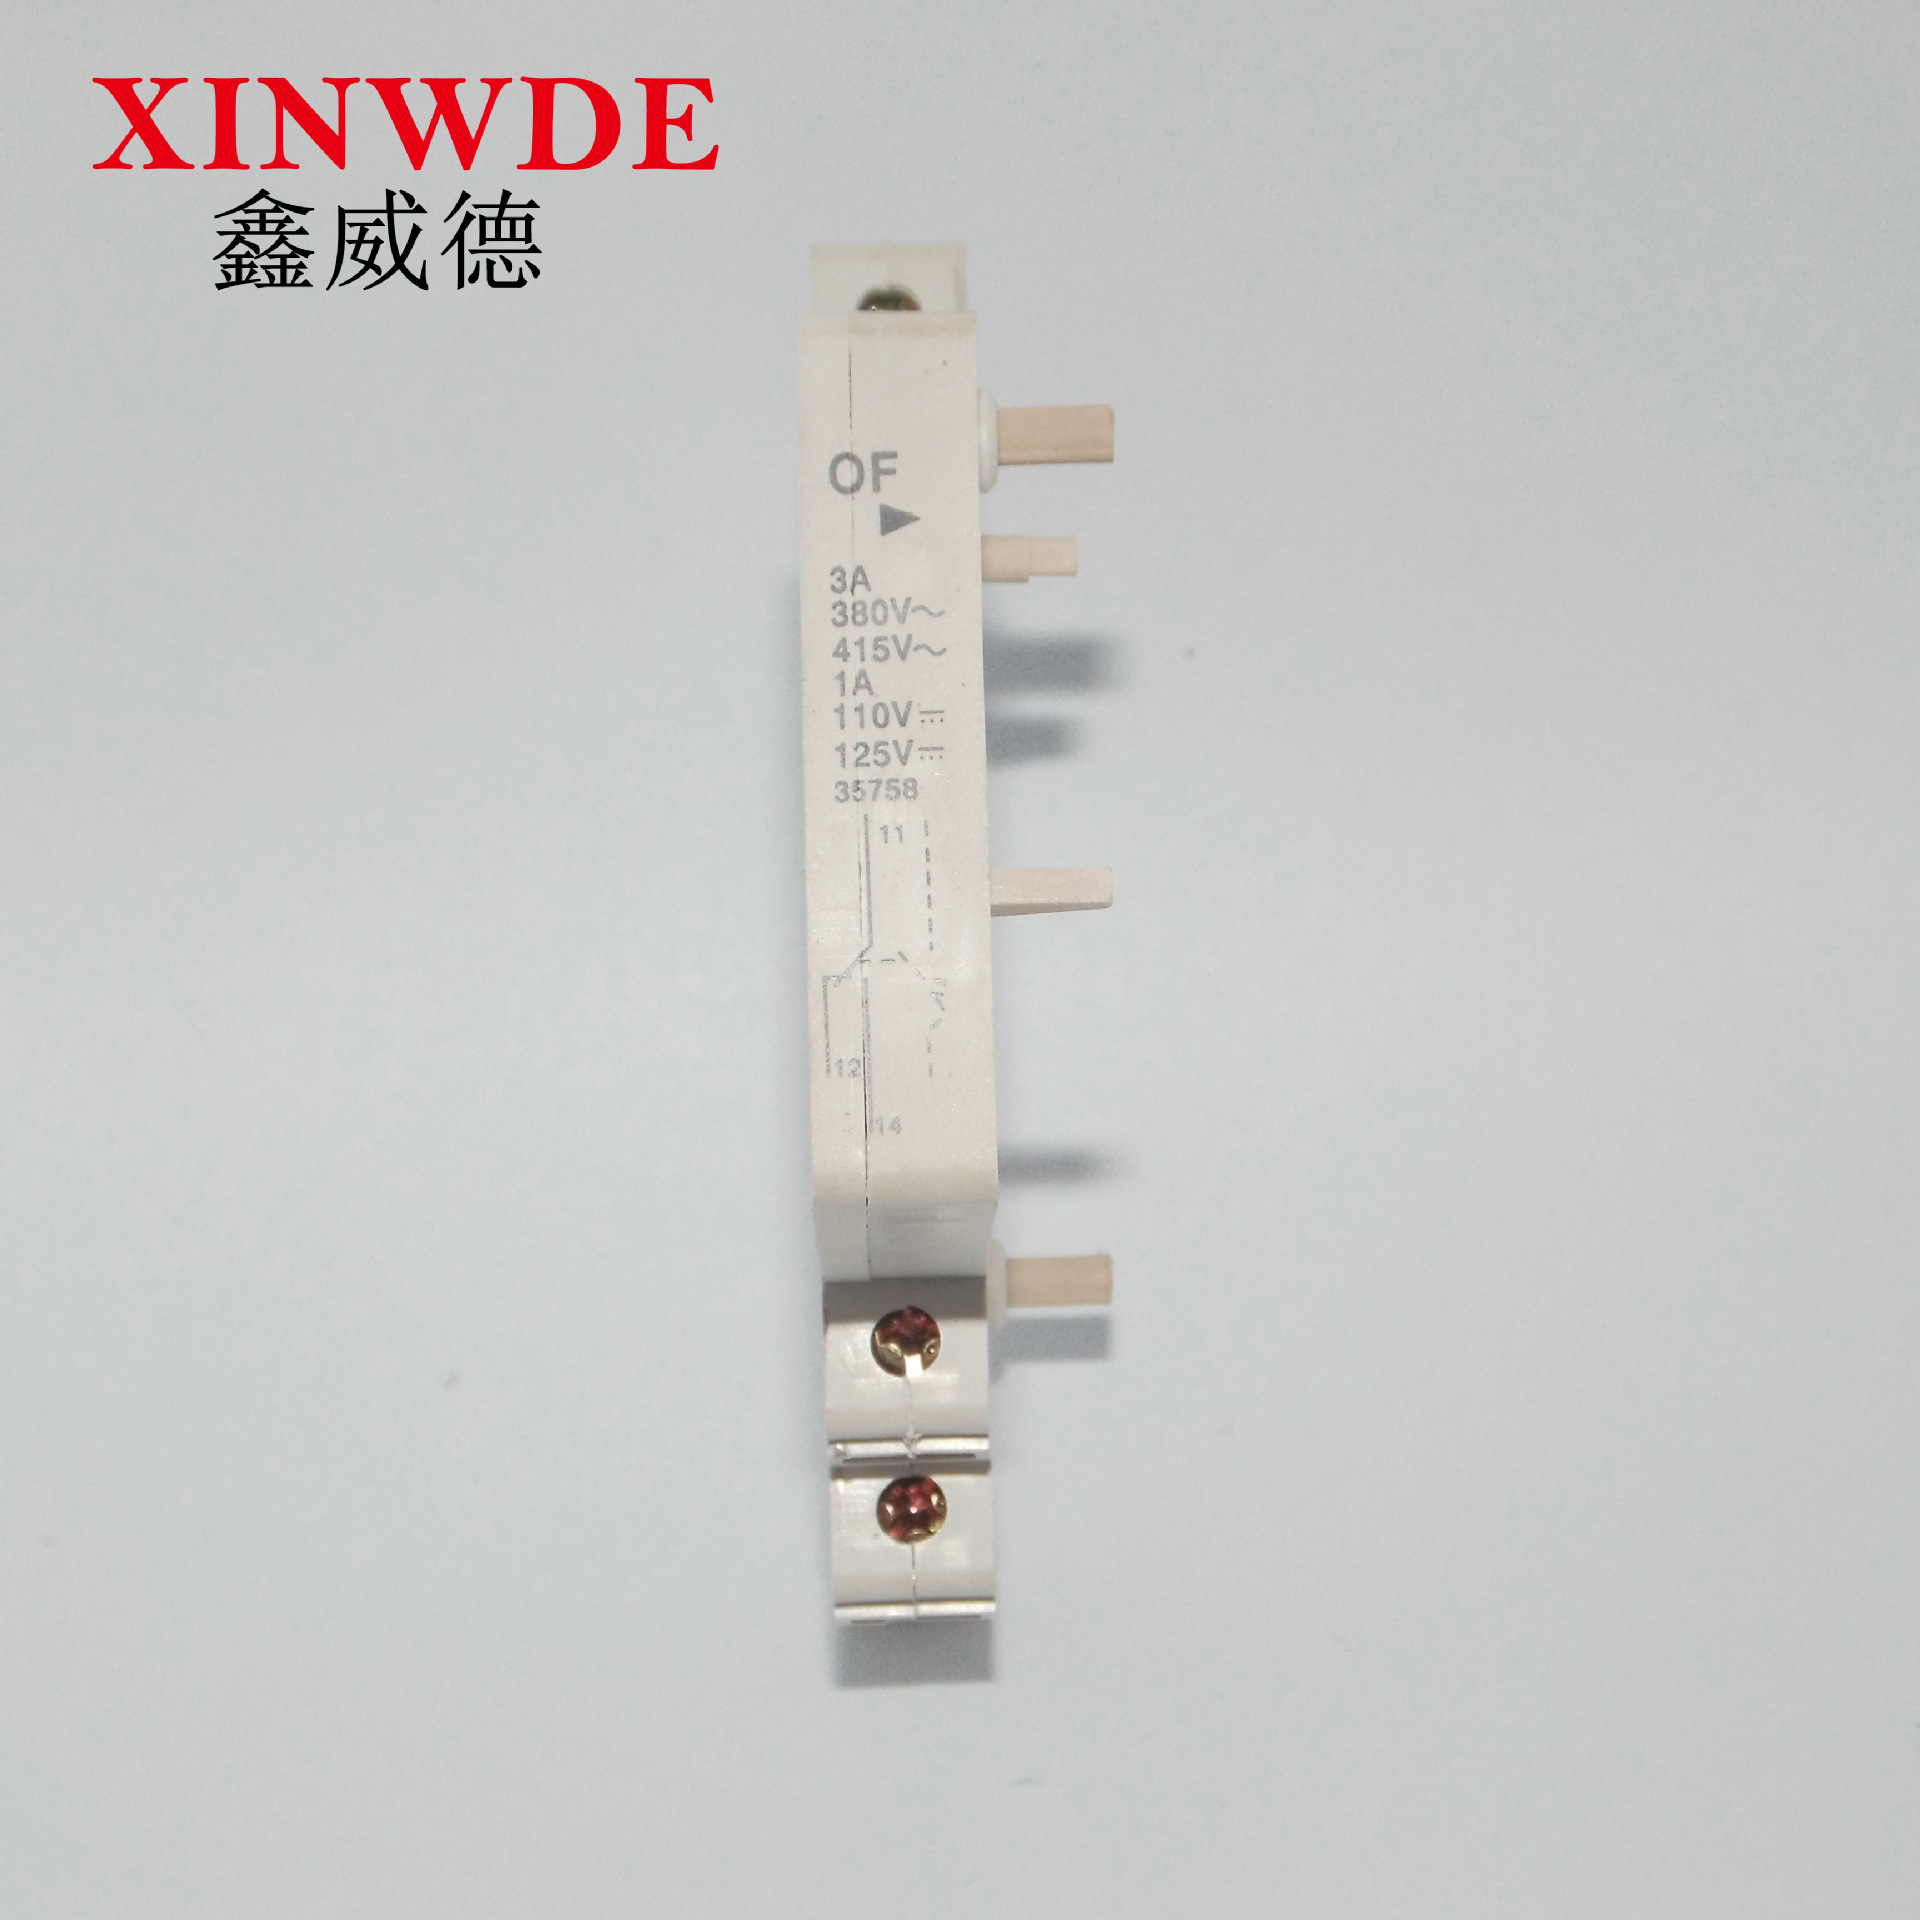 Xin Wei De OF auxiliary DZ47 enclosure small-scale Circuit breaker parts quality high quality Manufactor Direct selling